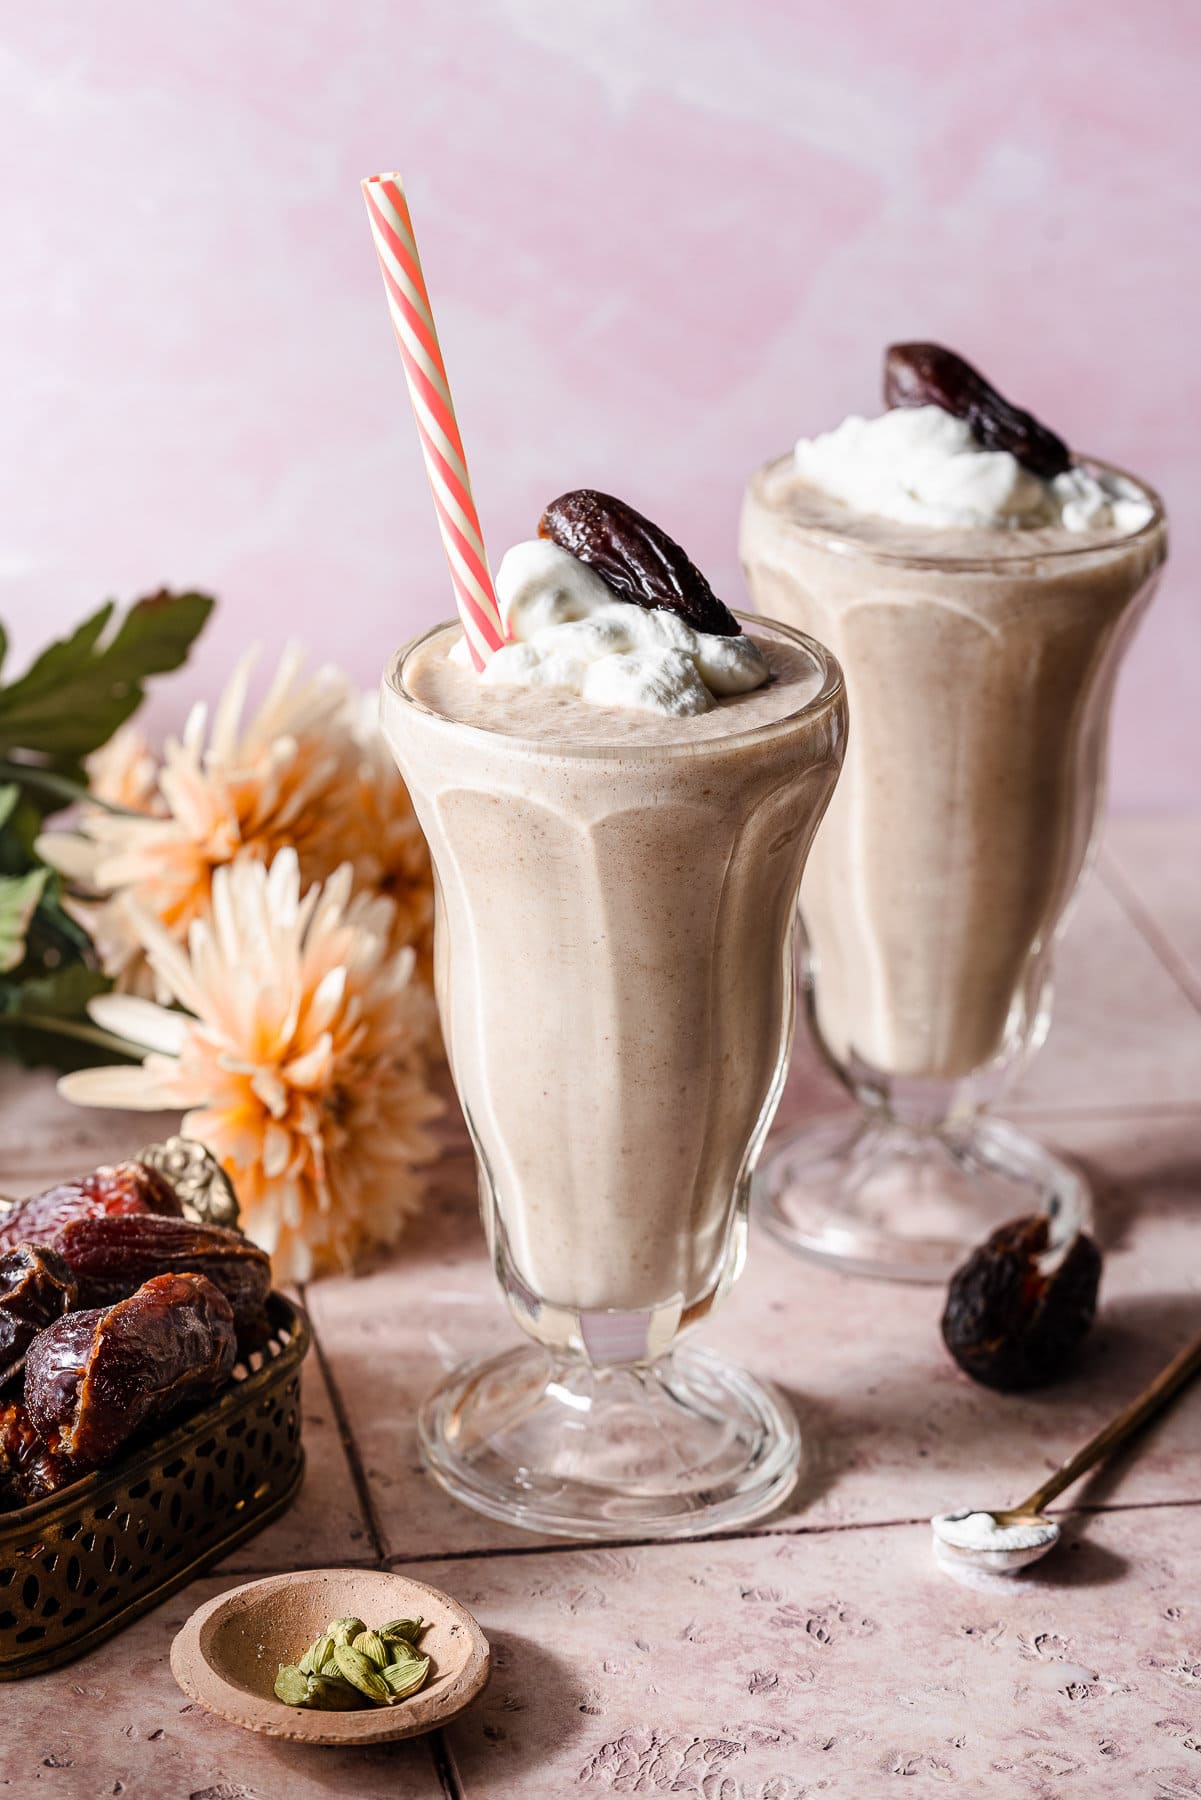 Two date shakes in milkshake glasses with whipped cream, a date, and a straw.